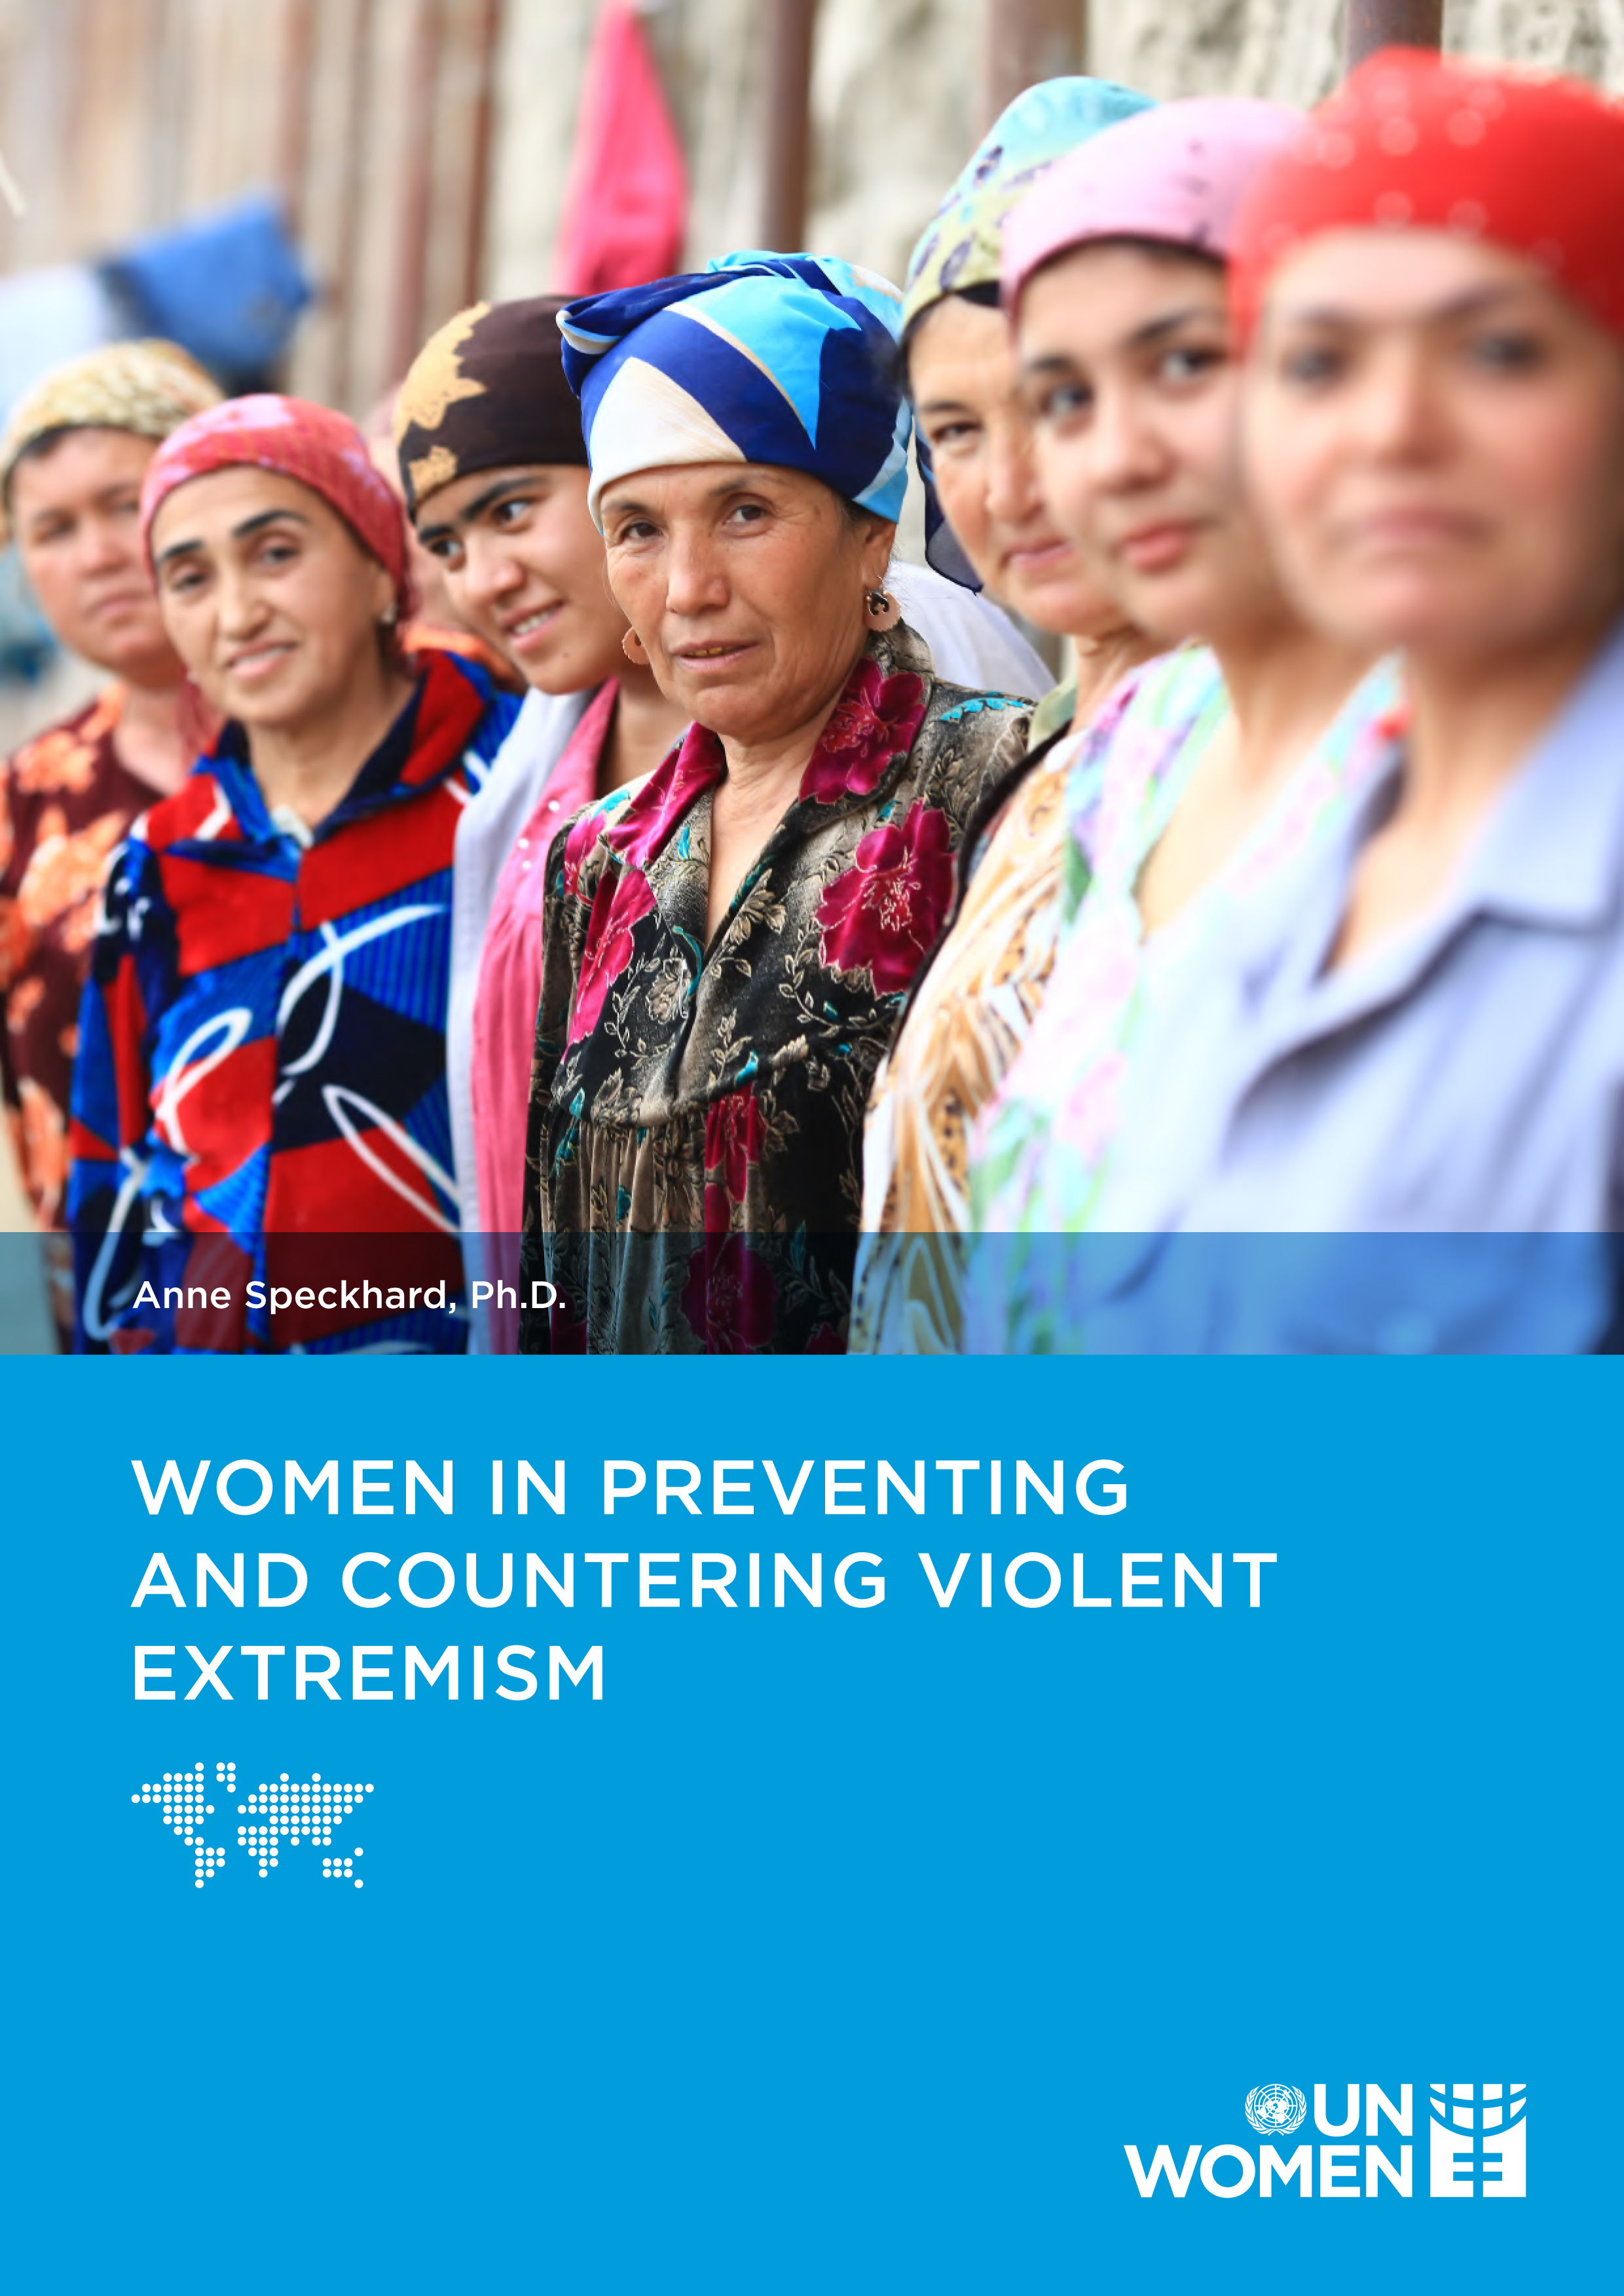 Women in Preventing and Countering Violent Extremism